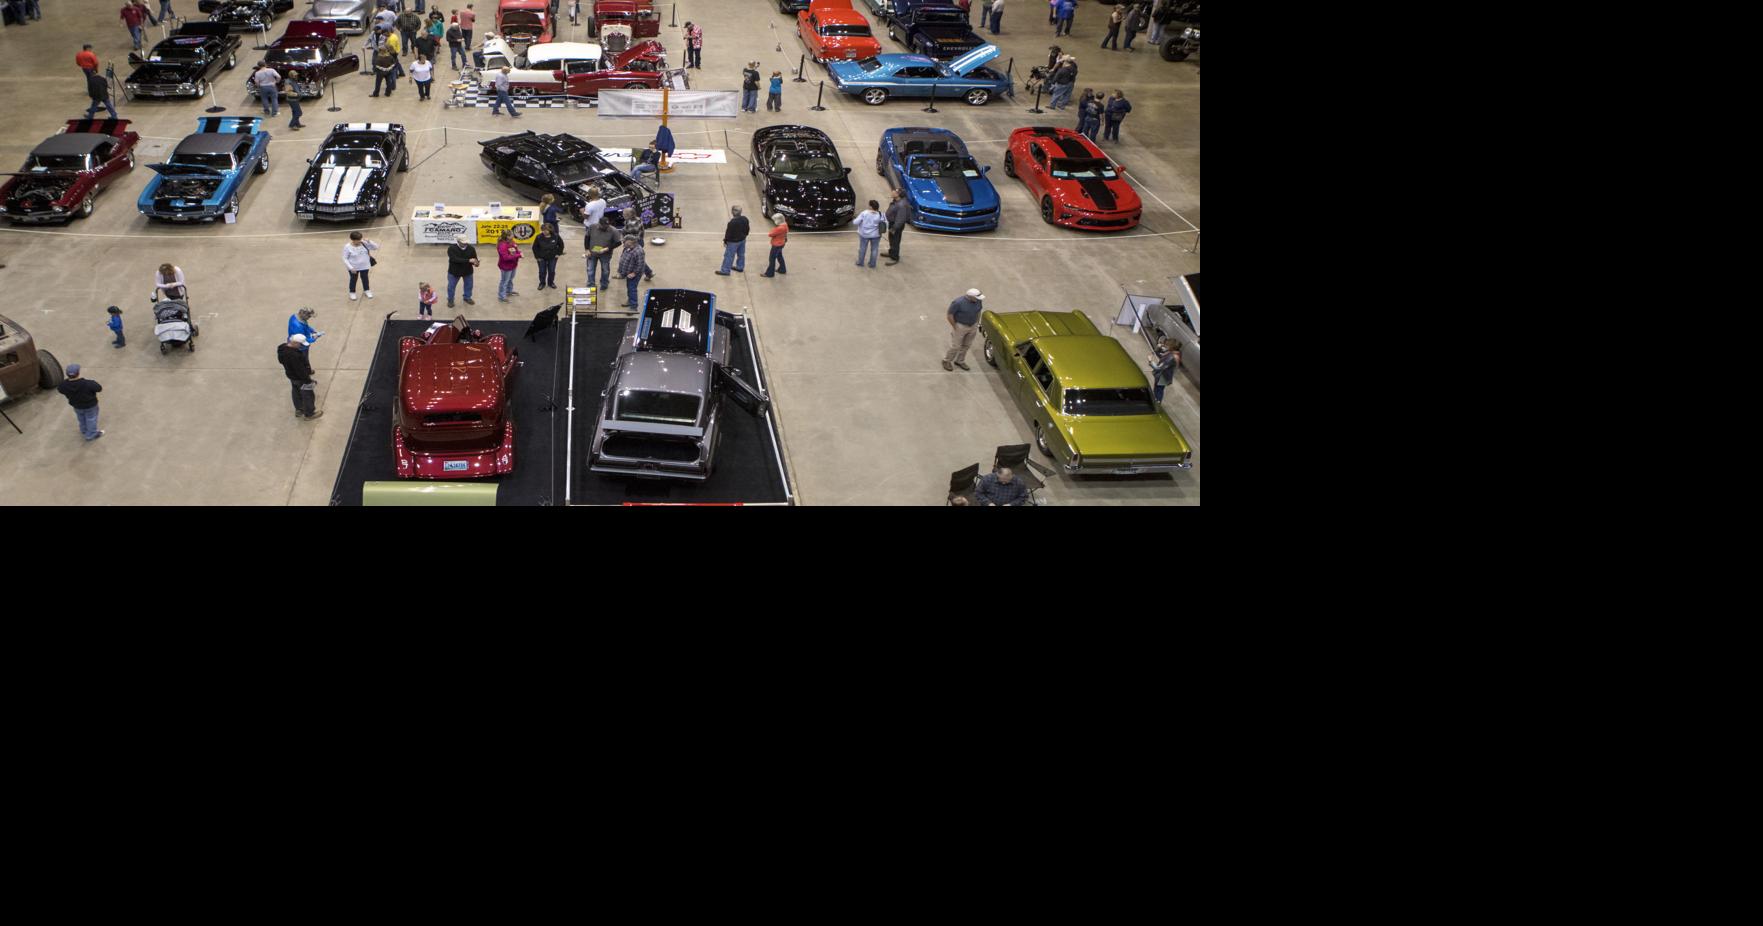 Counts Car Show returns with motorcycles, new events from Feb. 1820